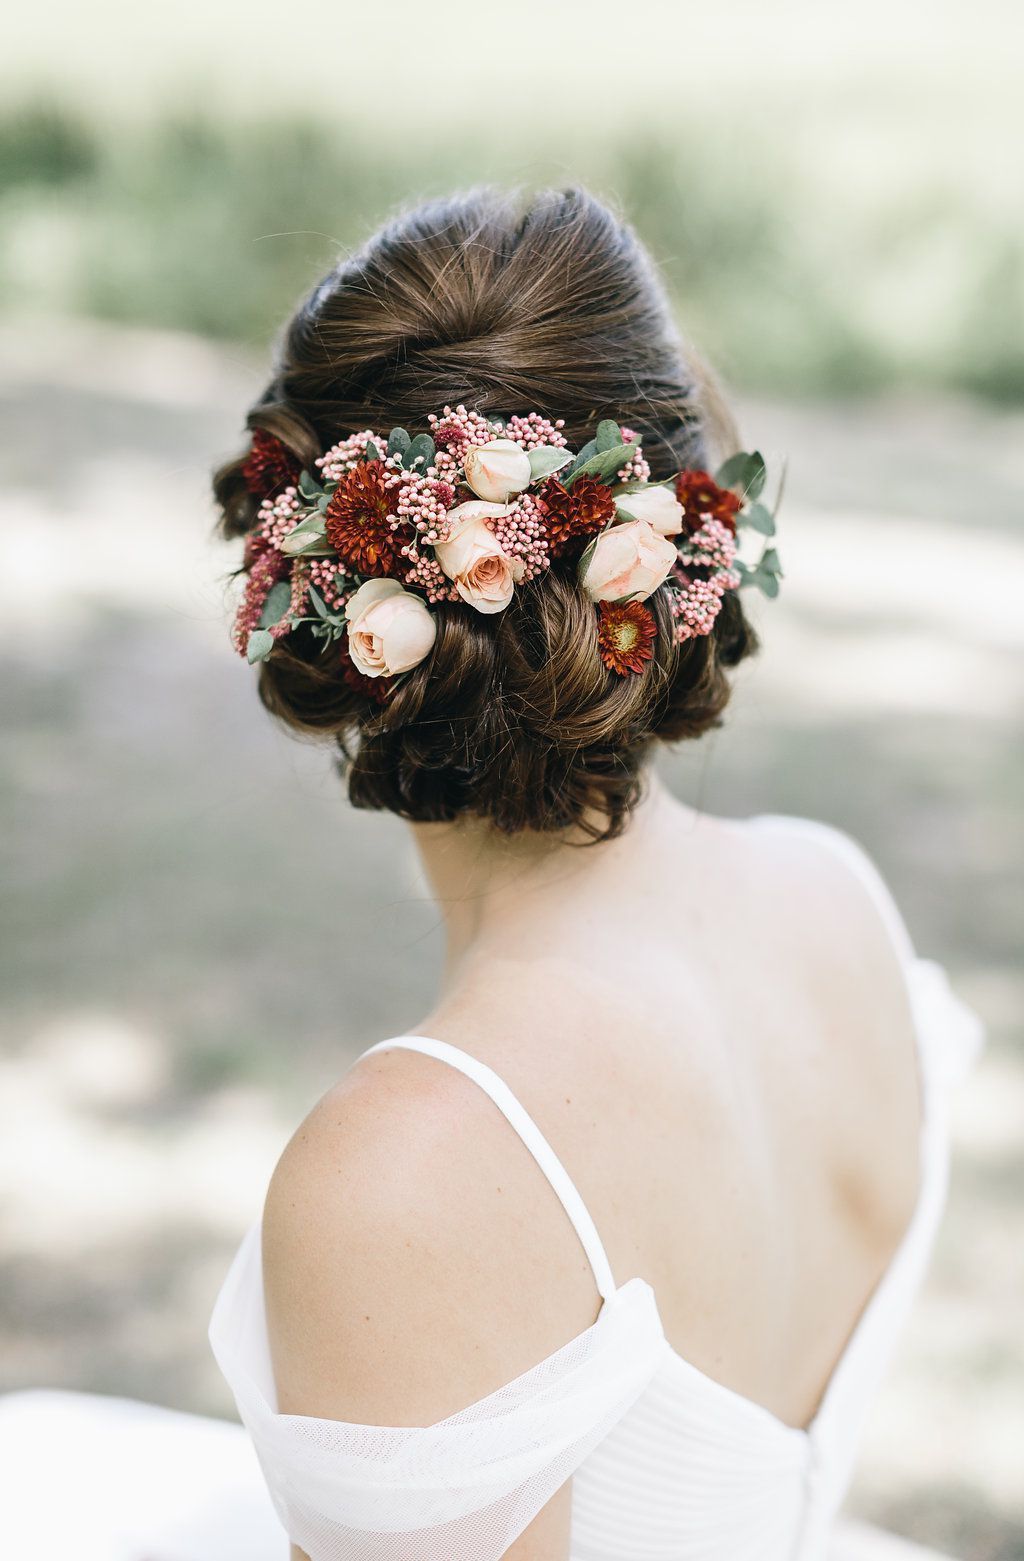 30 Wedding Hairstyles With Flowers For Fashionable Bridal Flower Hairstyle (Gallery 1 of 15)